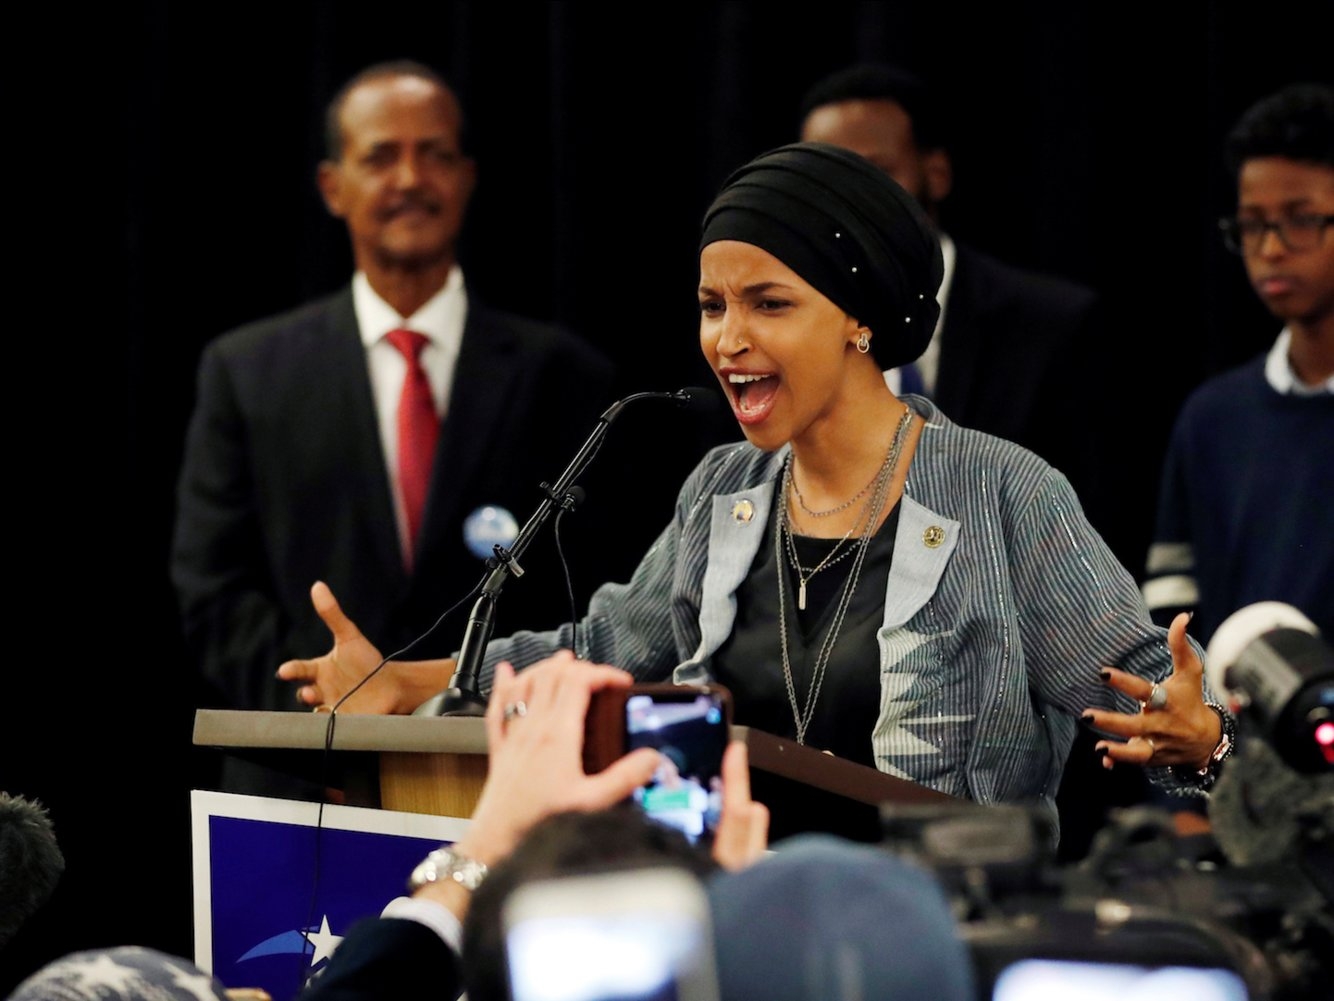 Rep. Ilhan Omar responds to ‘send her back’ chant with poem